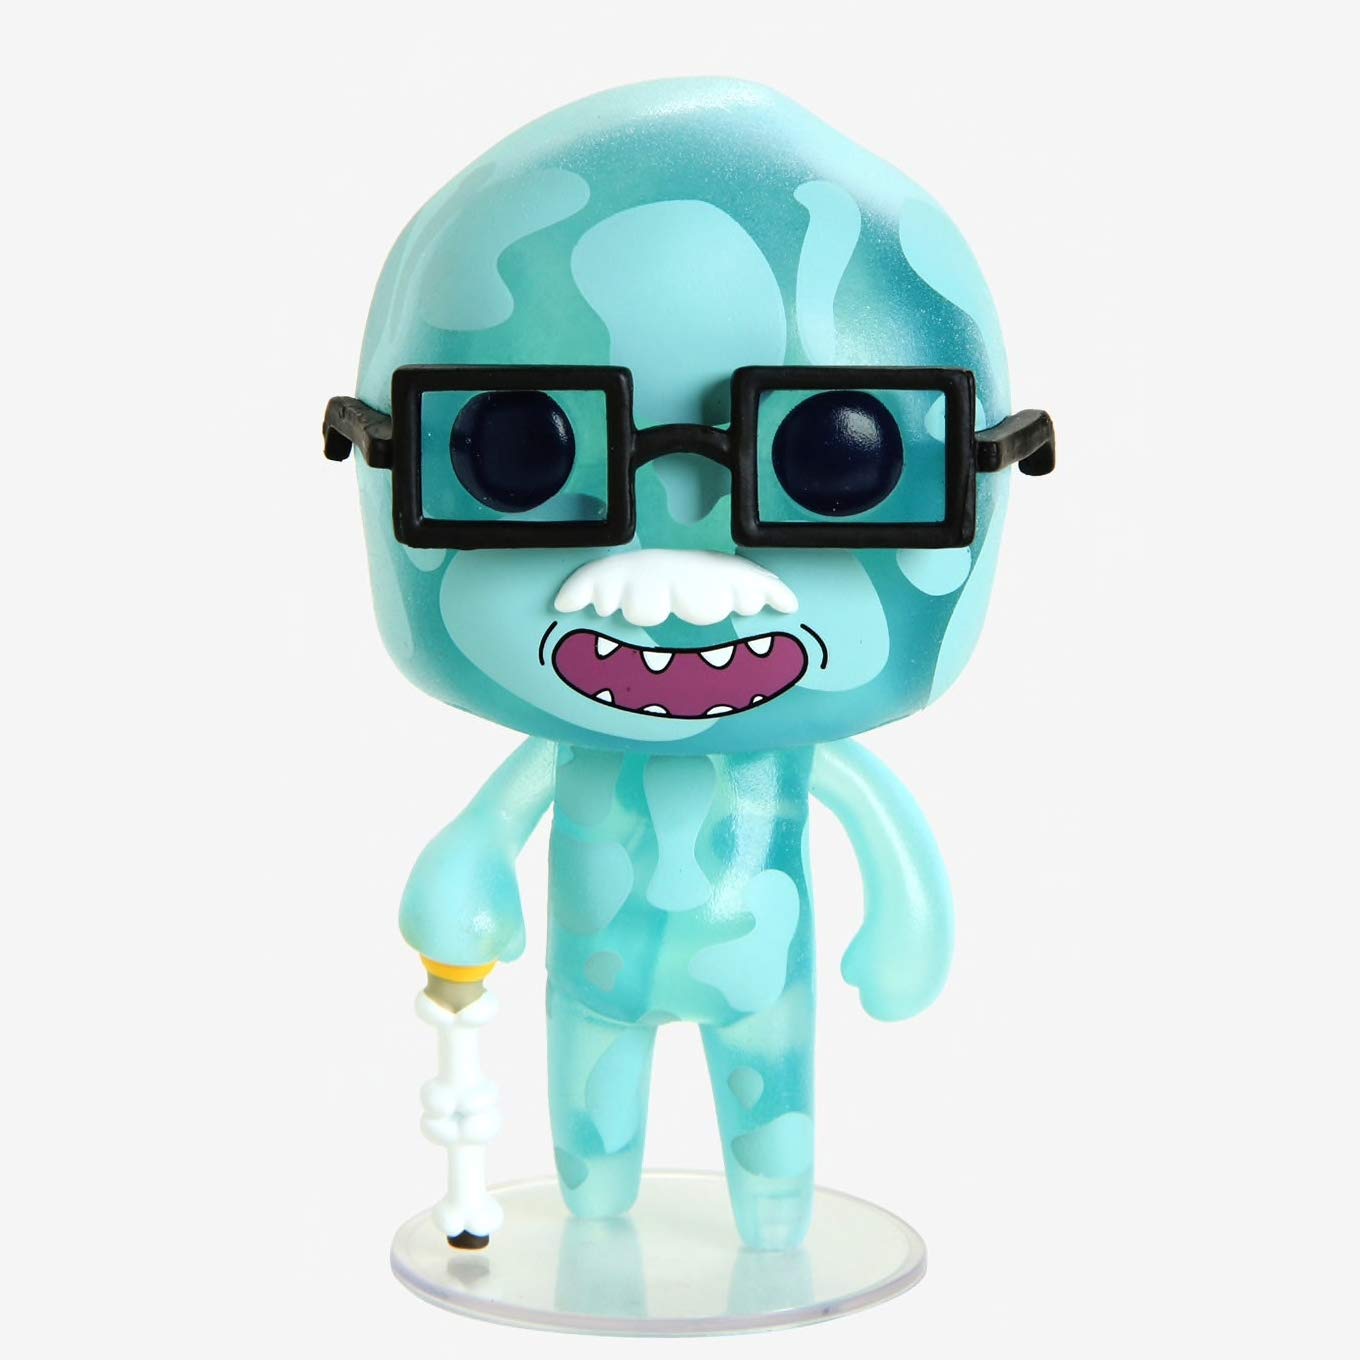 Funko POP! Animation: Rick and Morty - Dr. Xenon Bloom